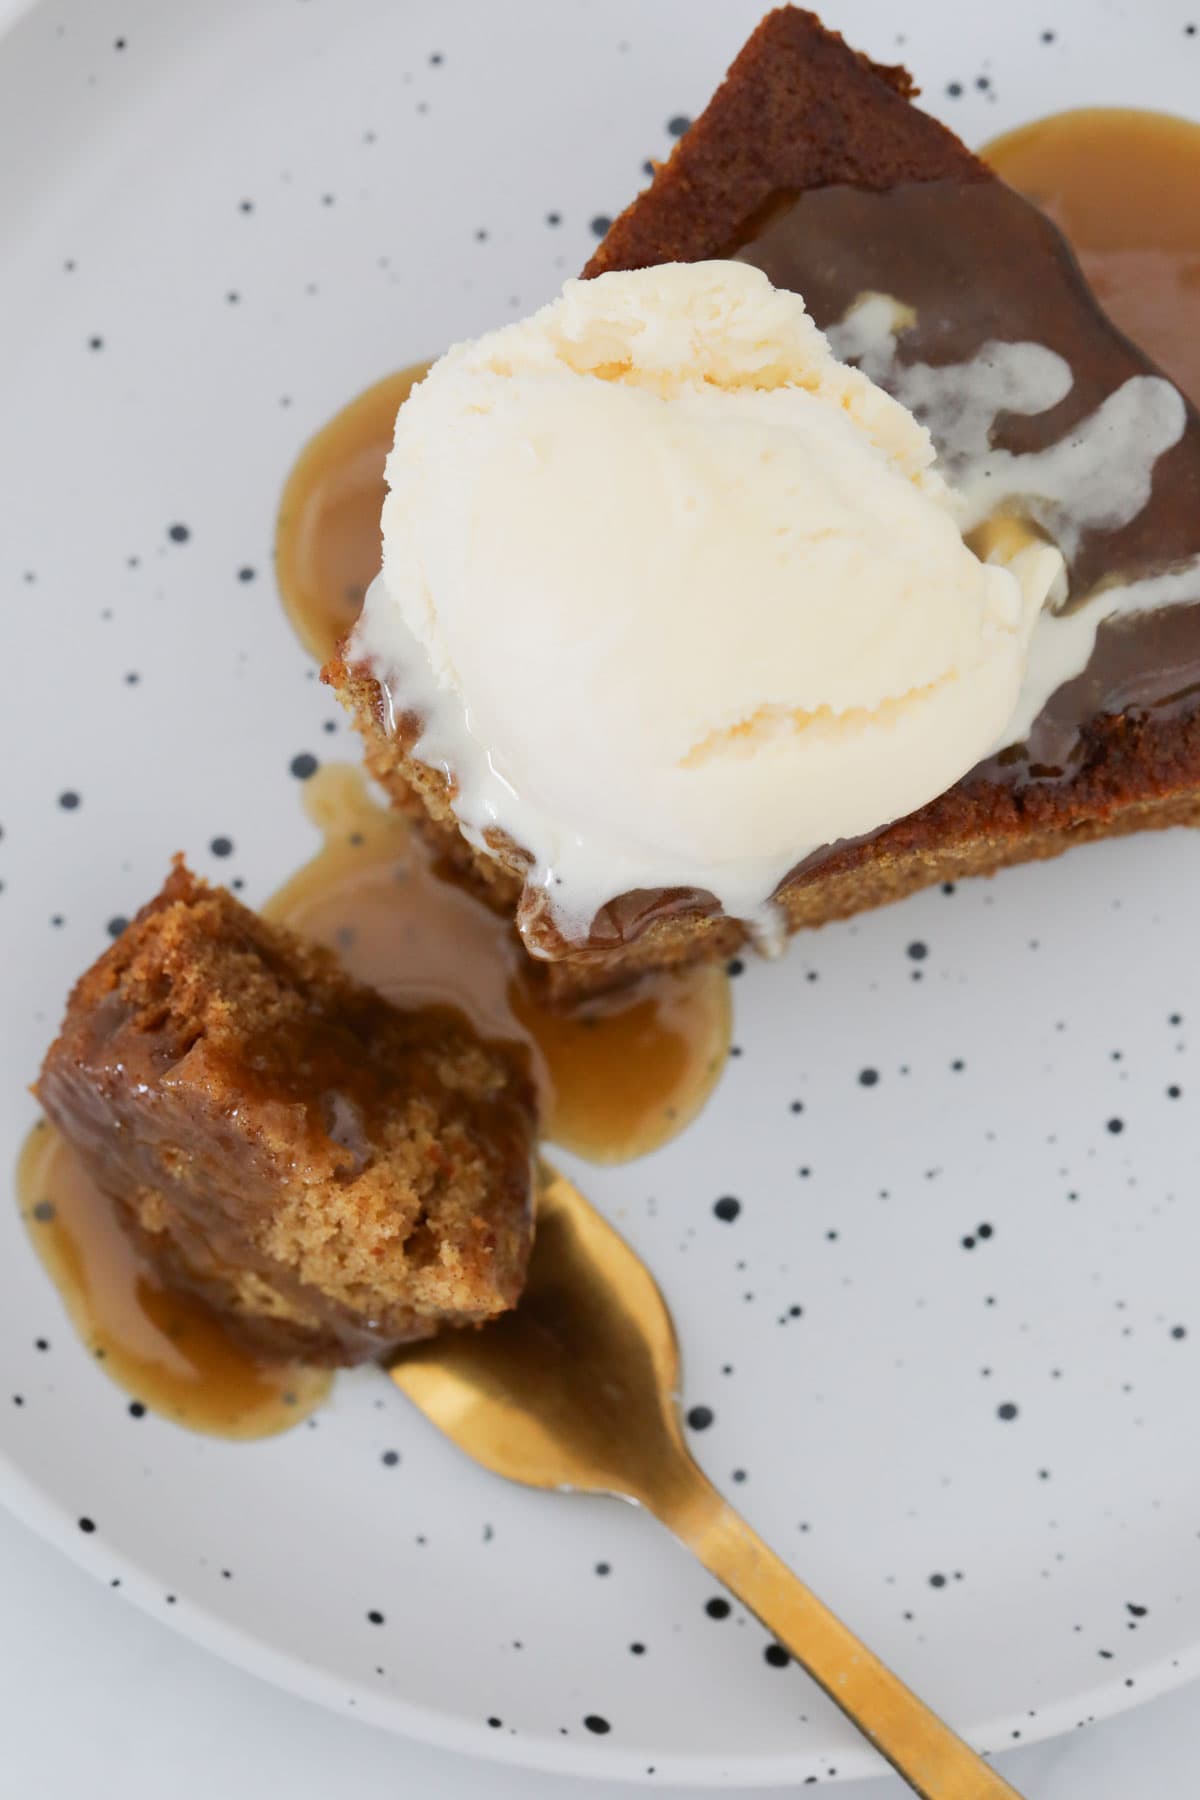 Overhead shot of a wedge of sticky date pudding and ice cream, with some on a spoon.